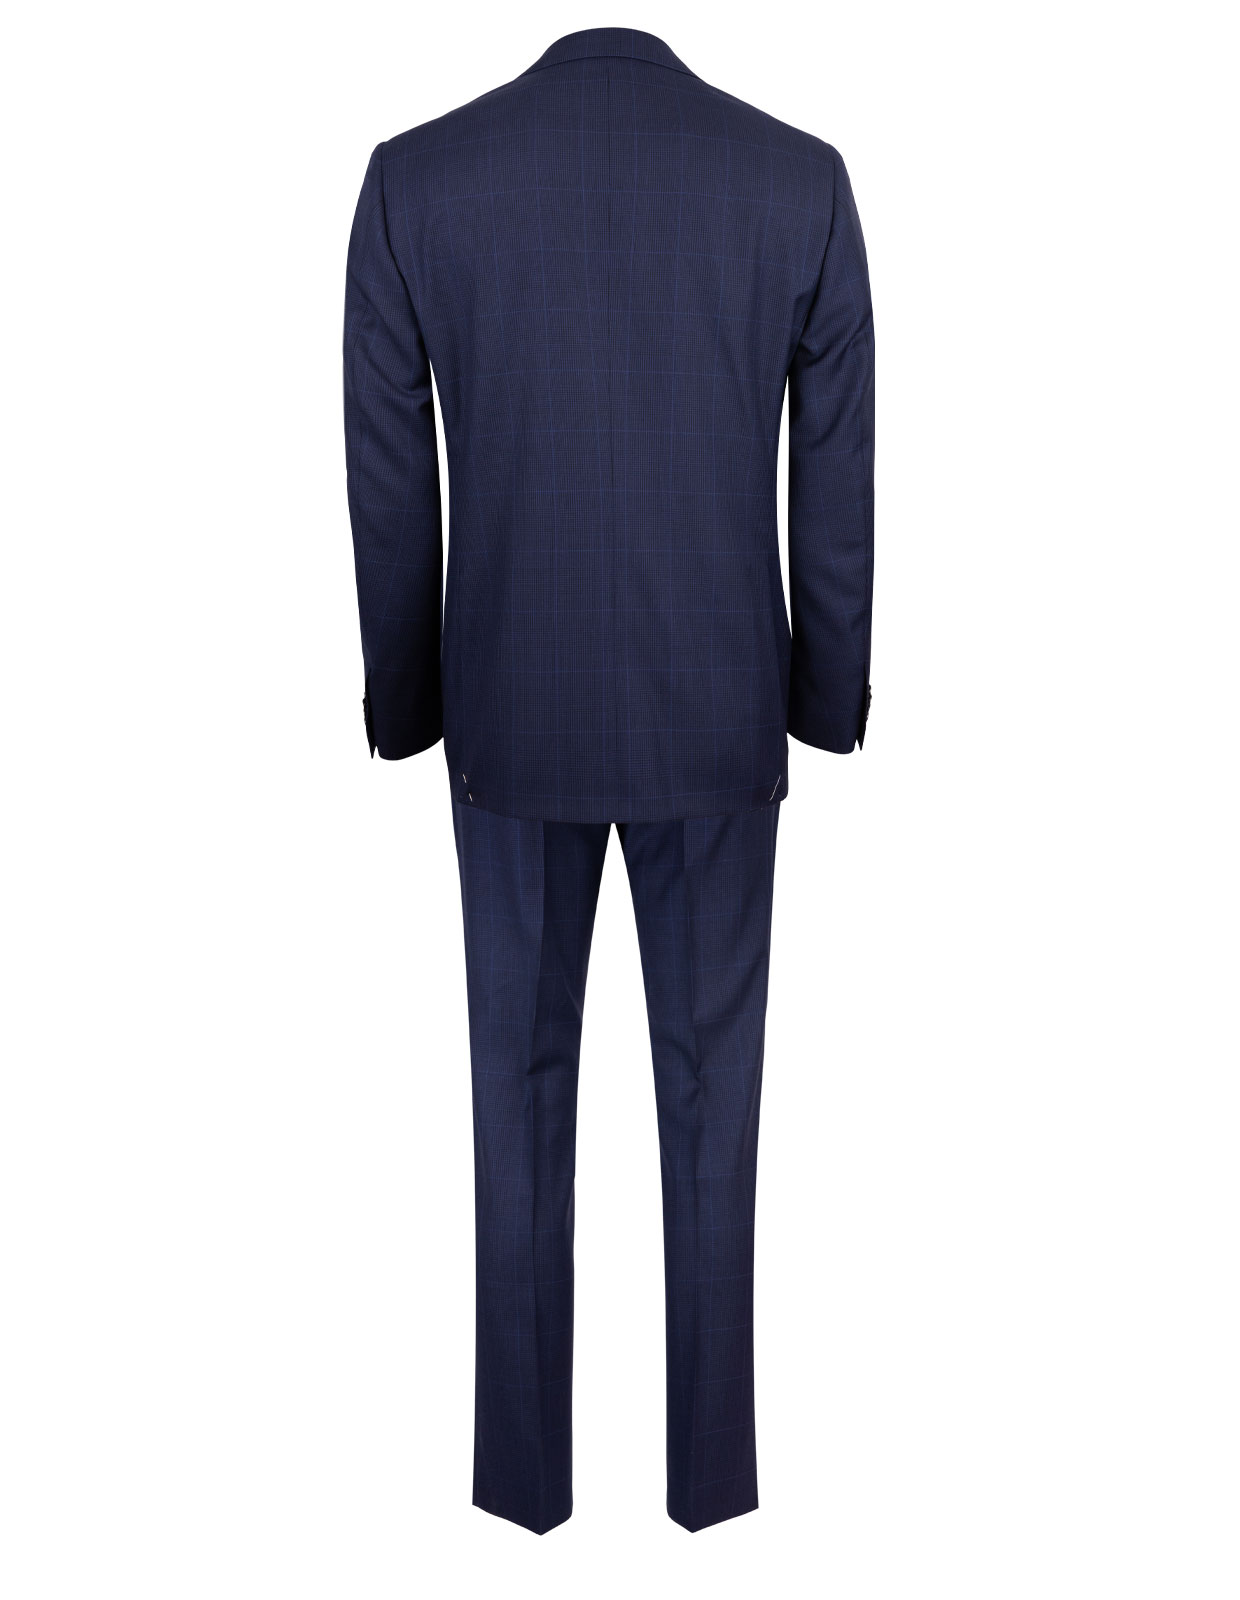 Leader 7268 Wool Suit Blue Check